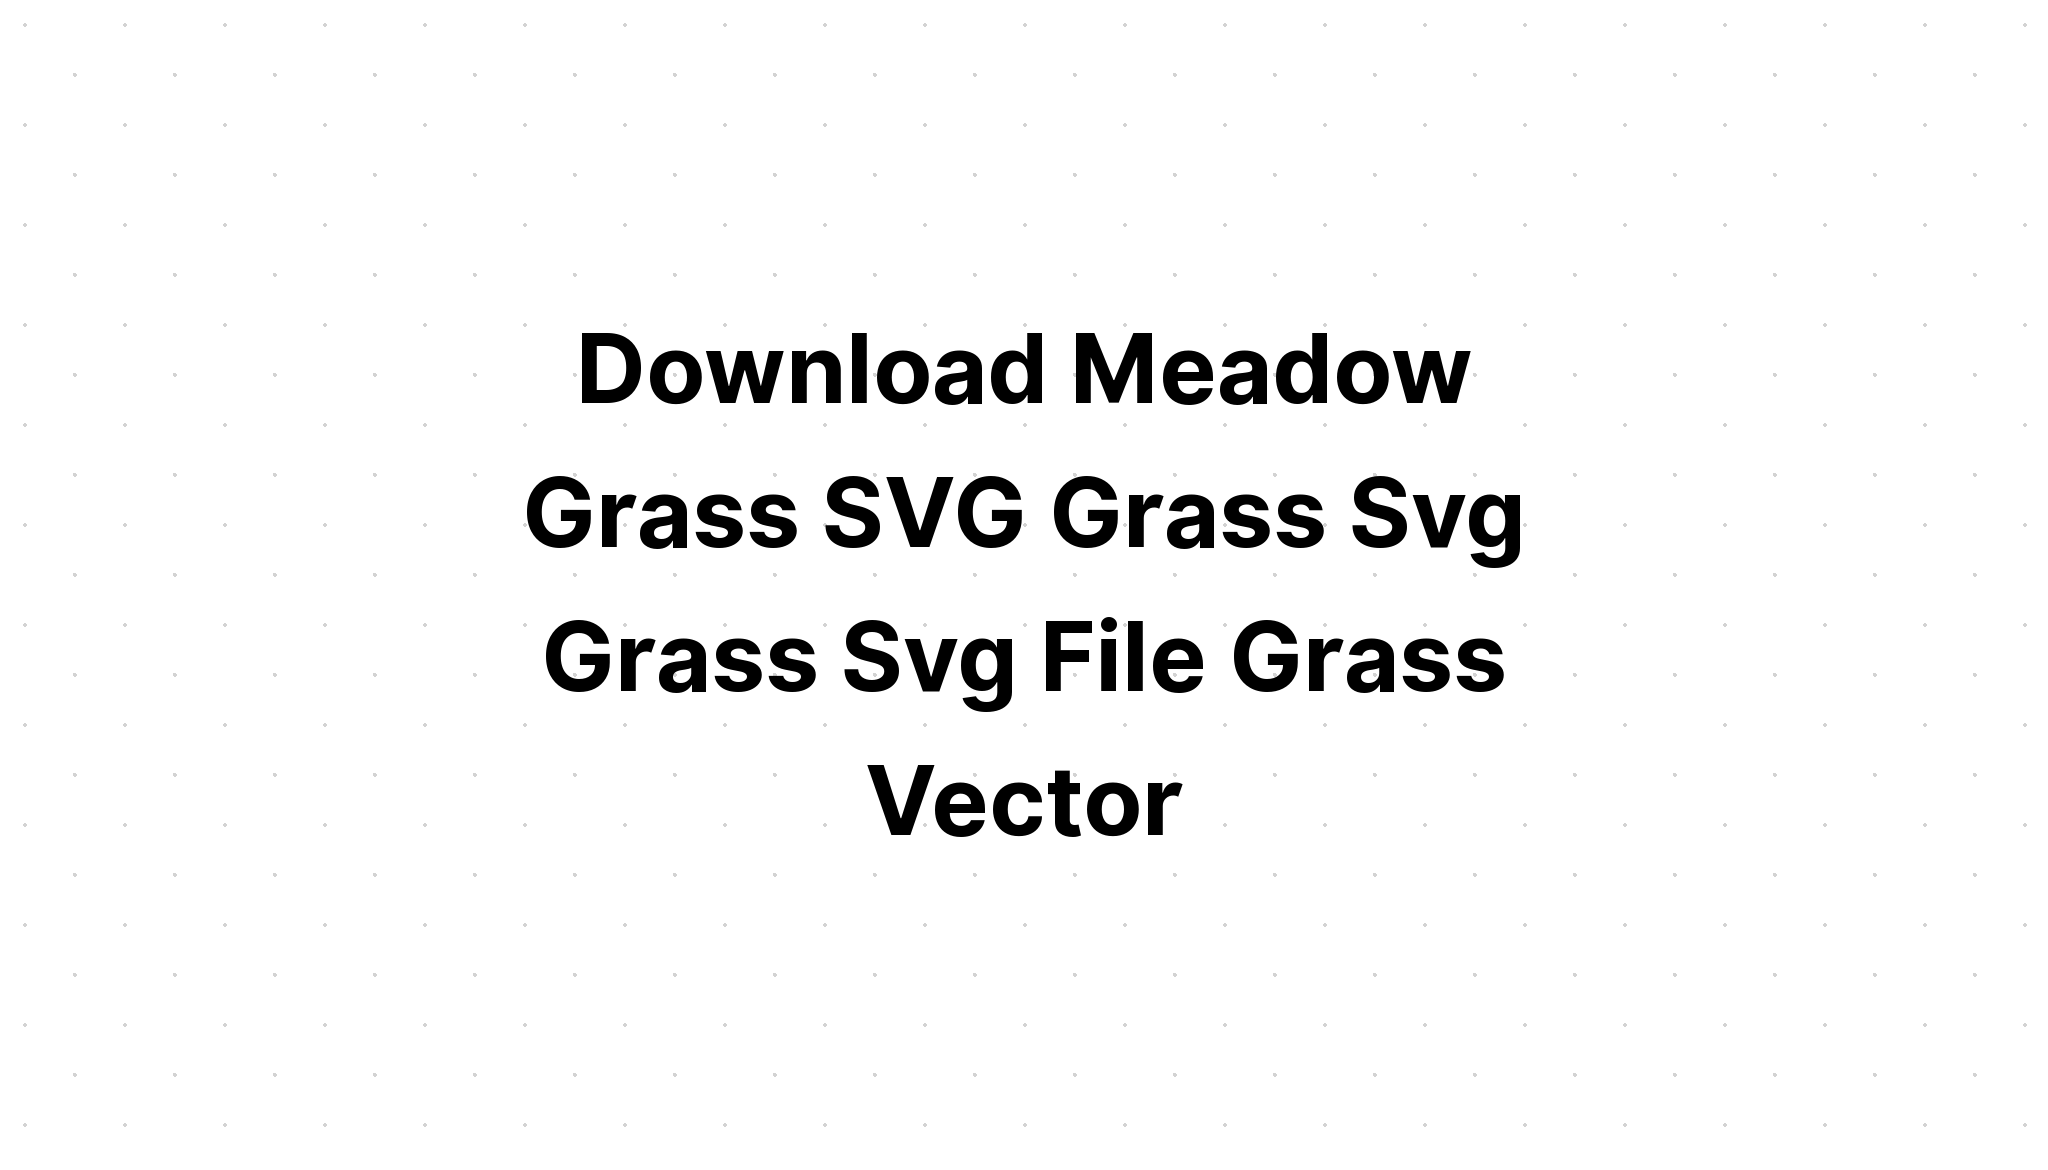 Download Svg Path Cut Out - Layered SVG Cut File